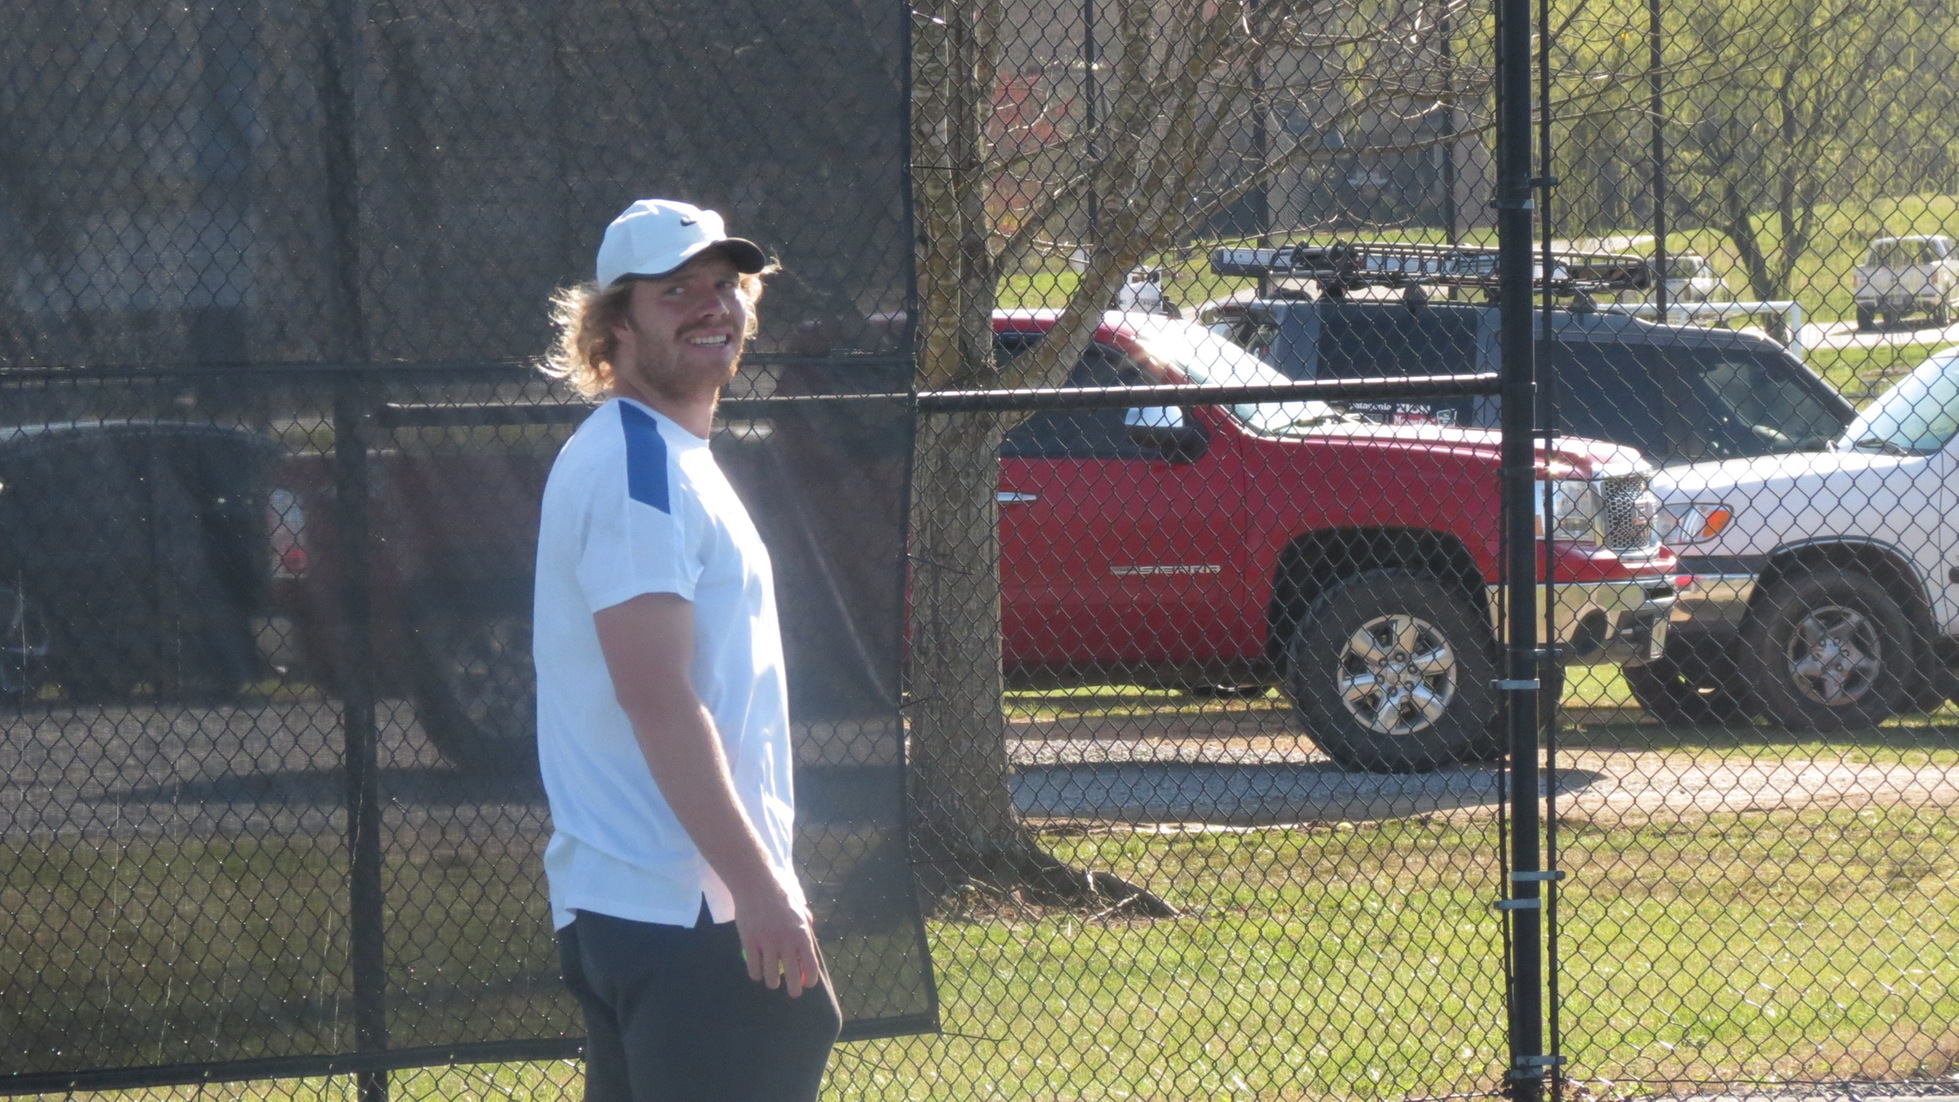 Tom Mittring Extends Singles Win Streak to 14 Matches in 6-3 Setback to Covenant